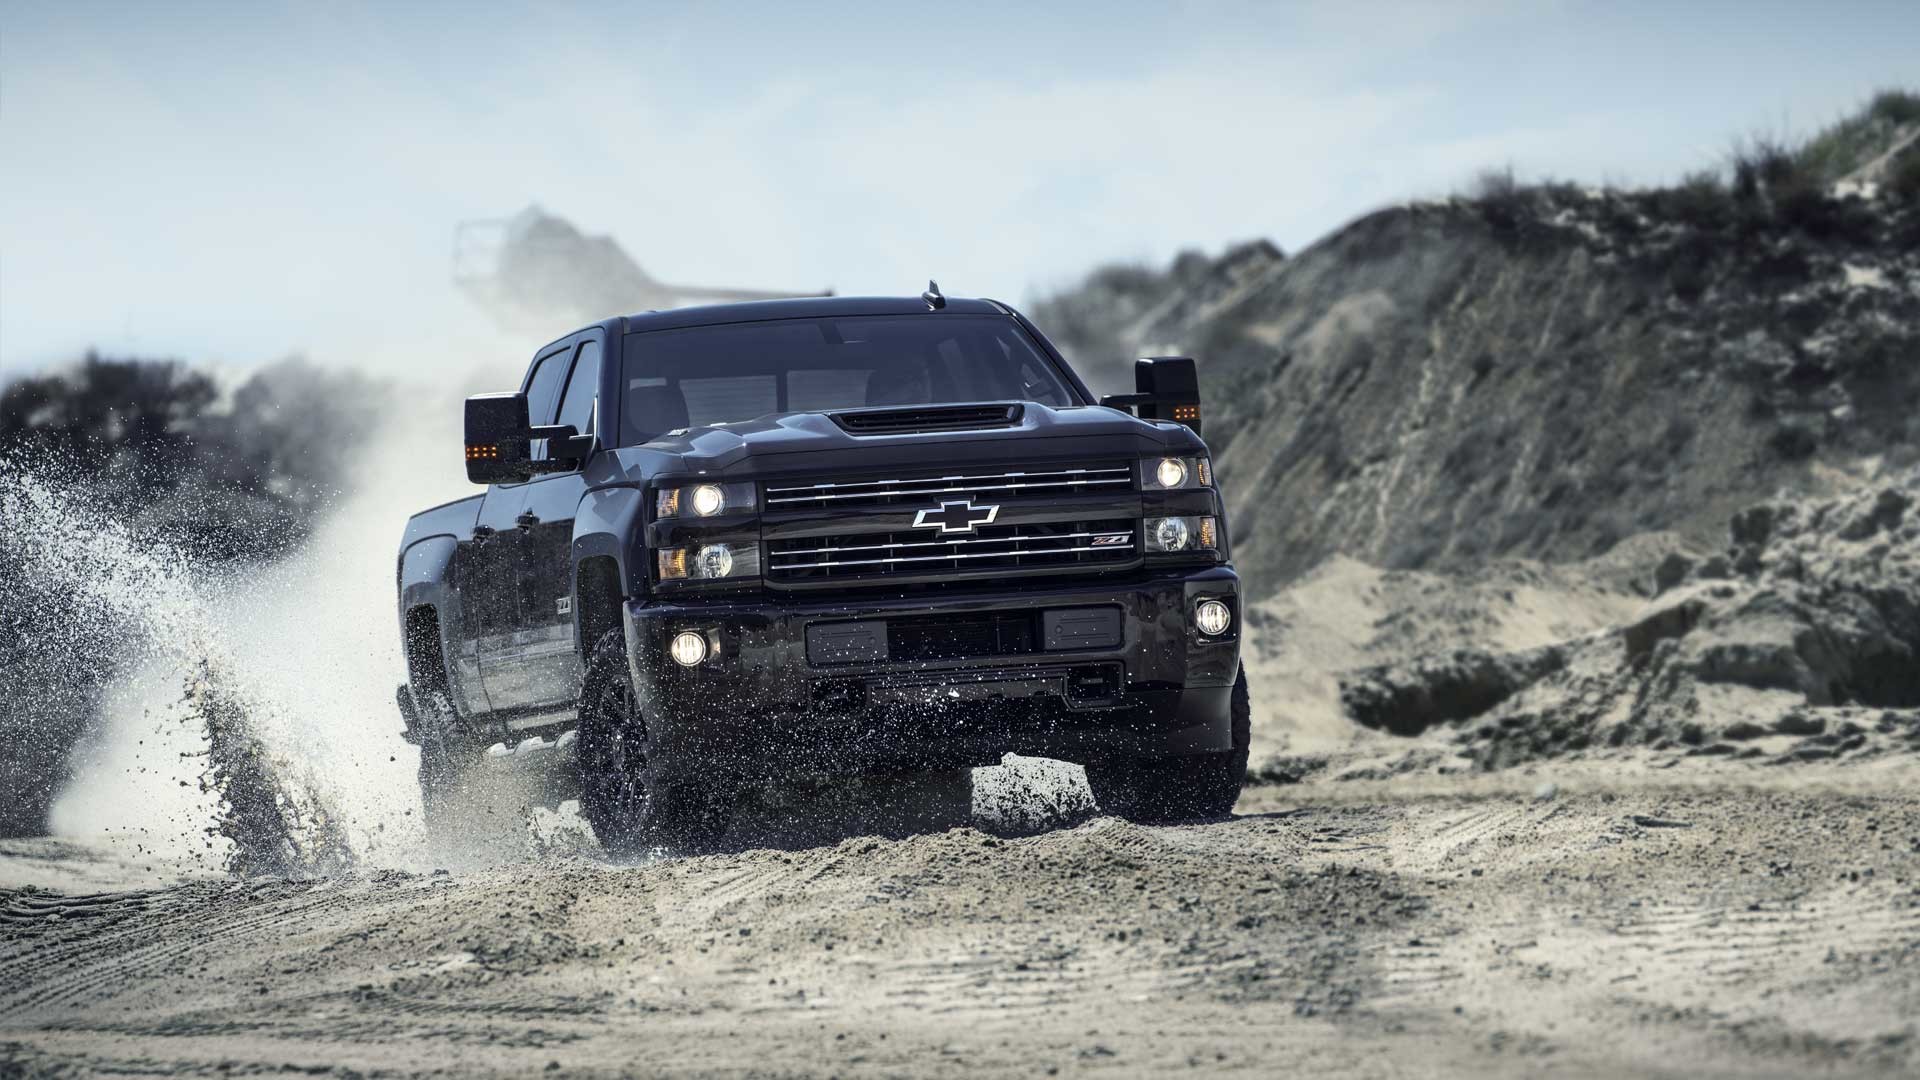 Chevy Truck Wallpaper HD (48+ images)